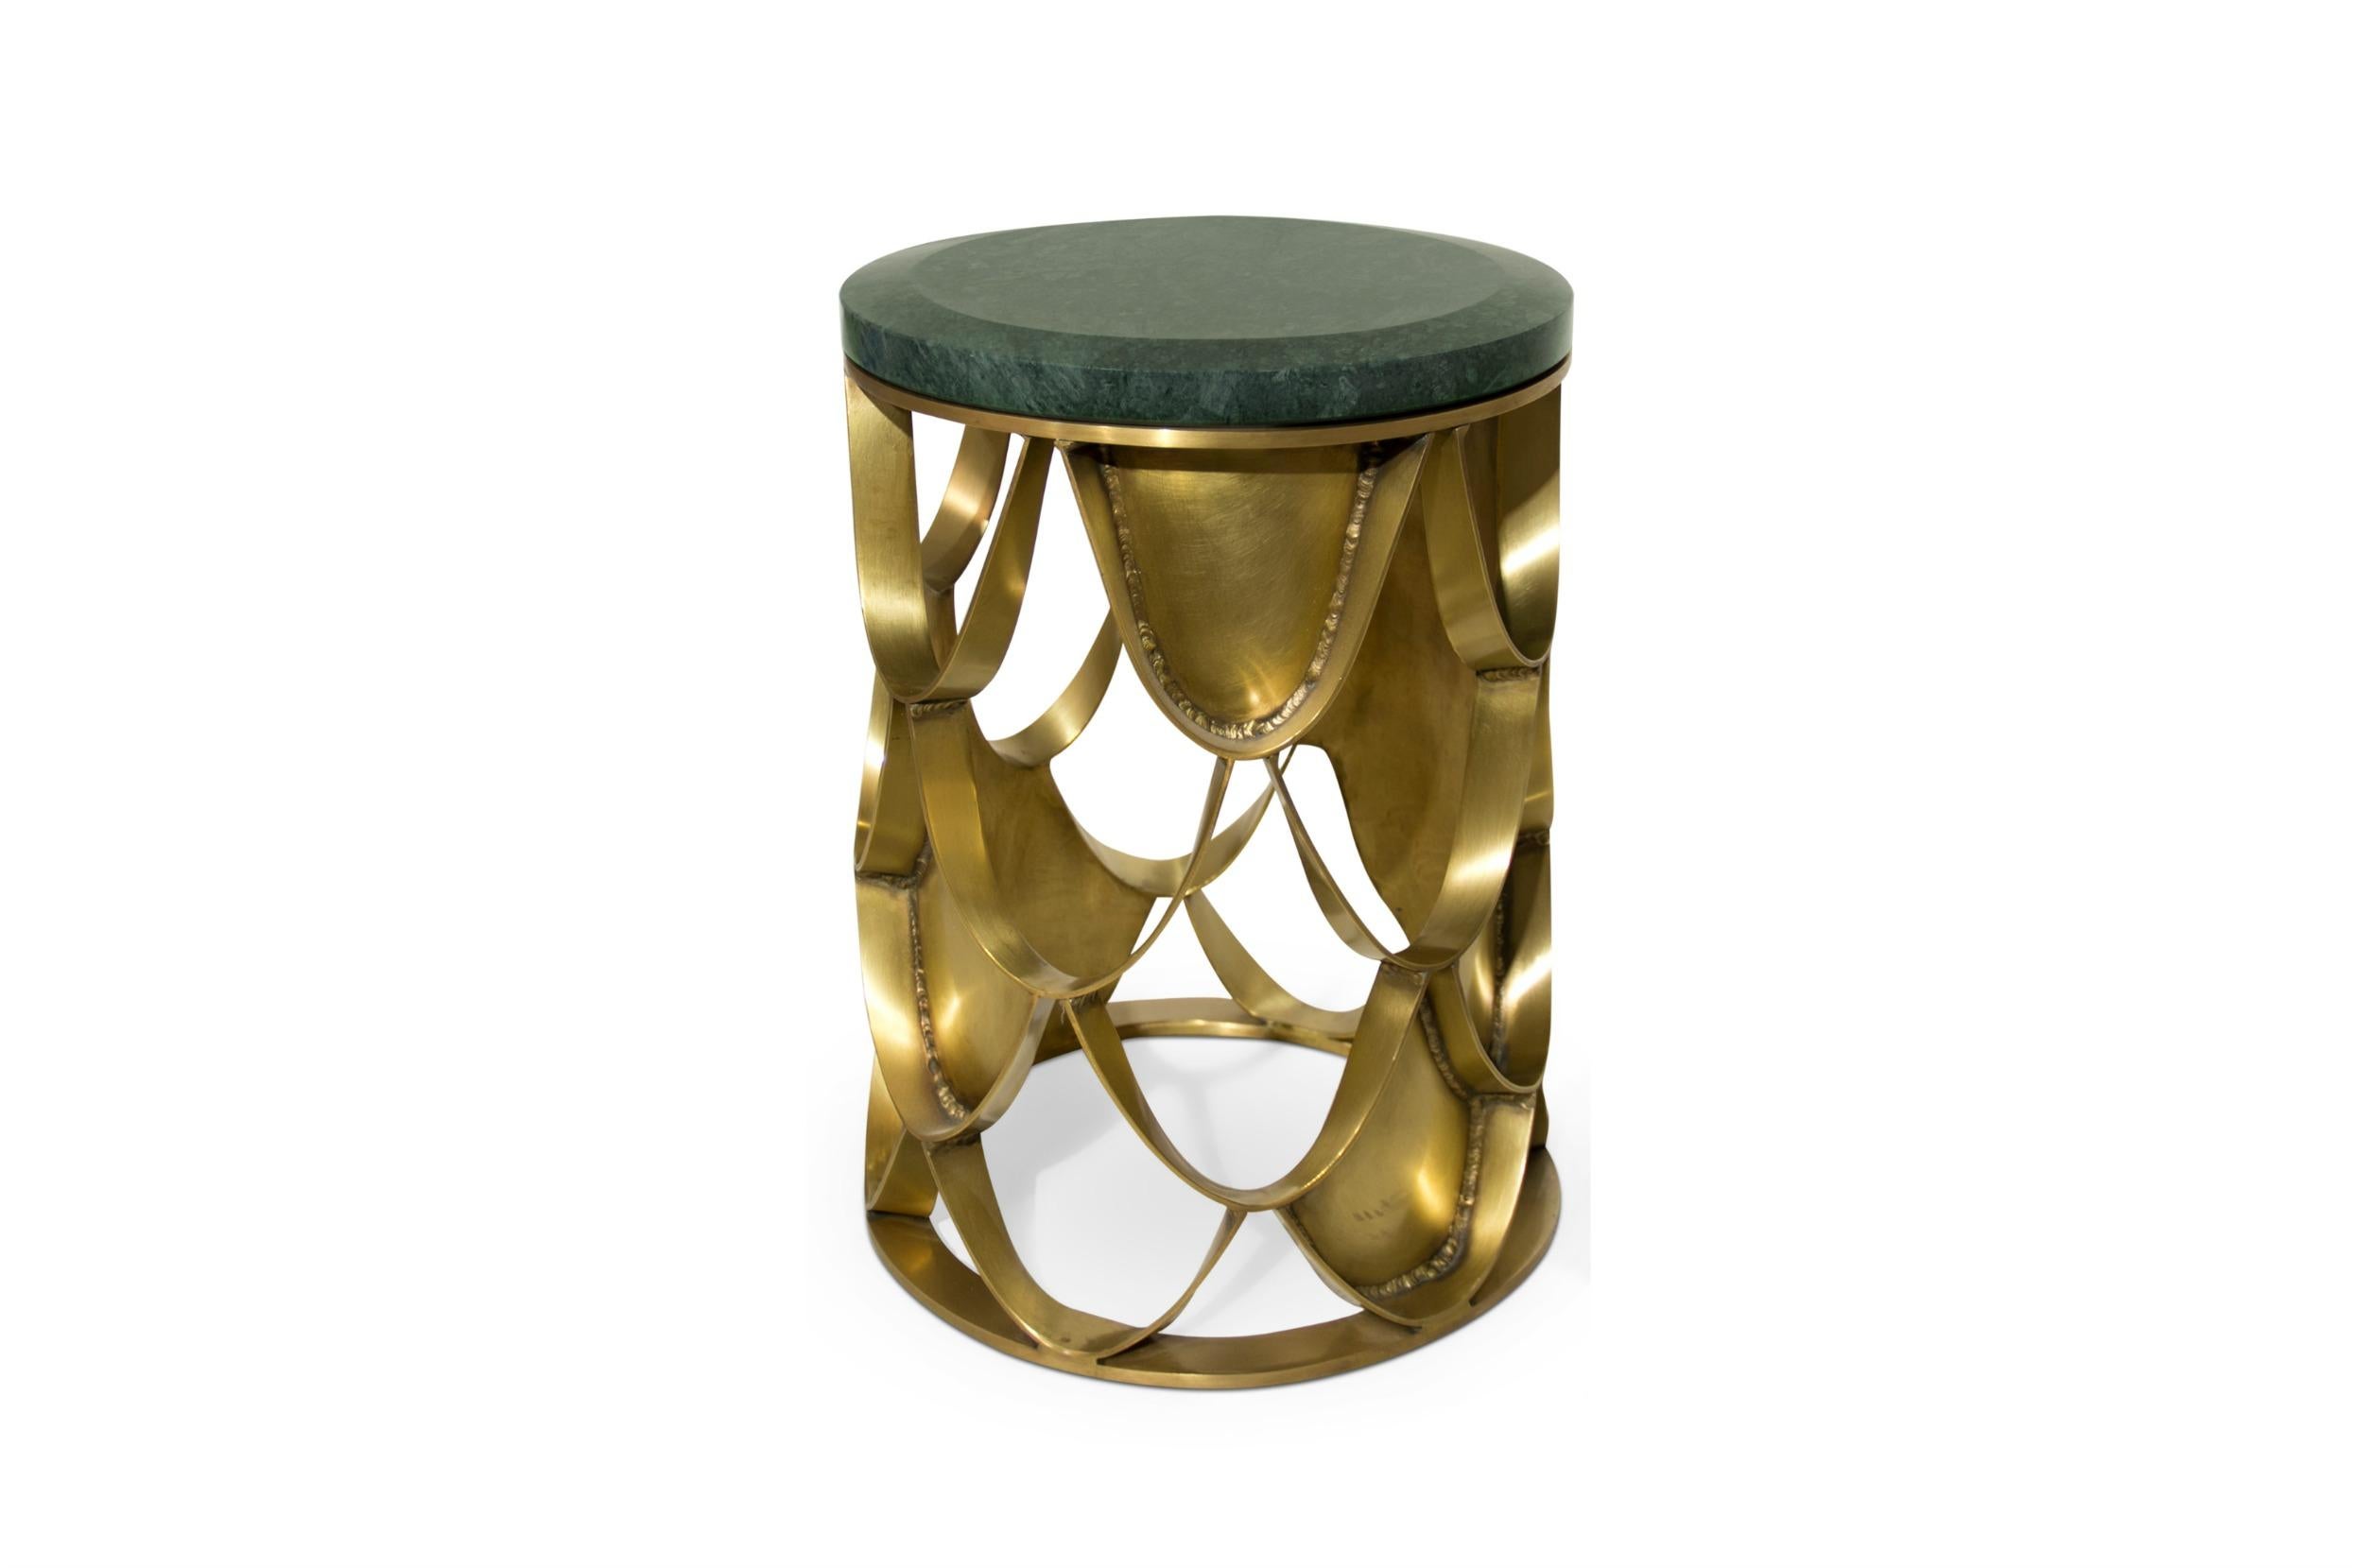 Contemporary Modern Koi In Brass With White Marble Top Side Table by Brabbu

A Contemporary Modern Koi in Brass with White Marble top Side Table by Brabbu, with a base in brushed aged brass and a top in marble, this round side table is a recurring